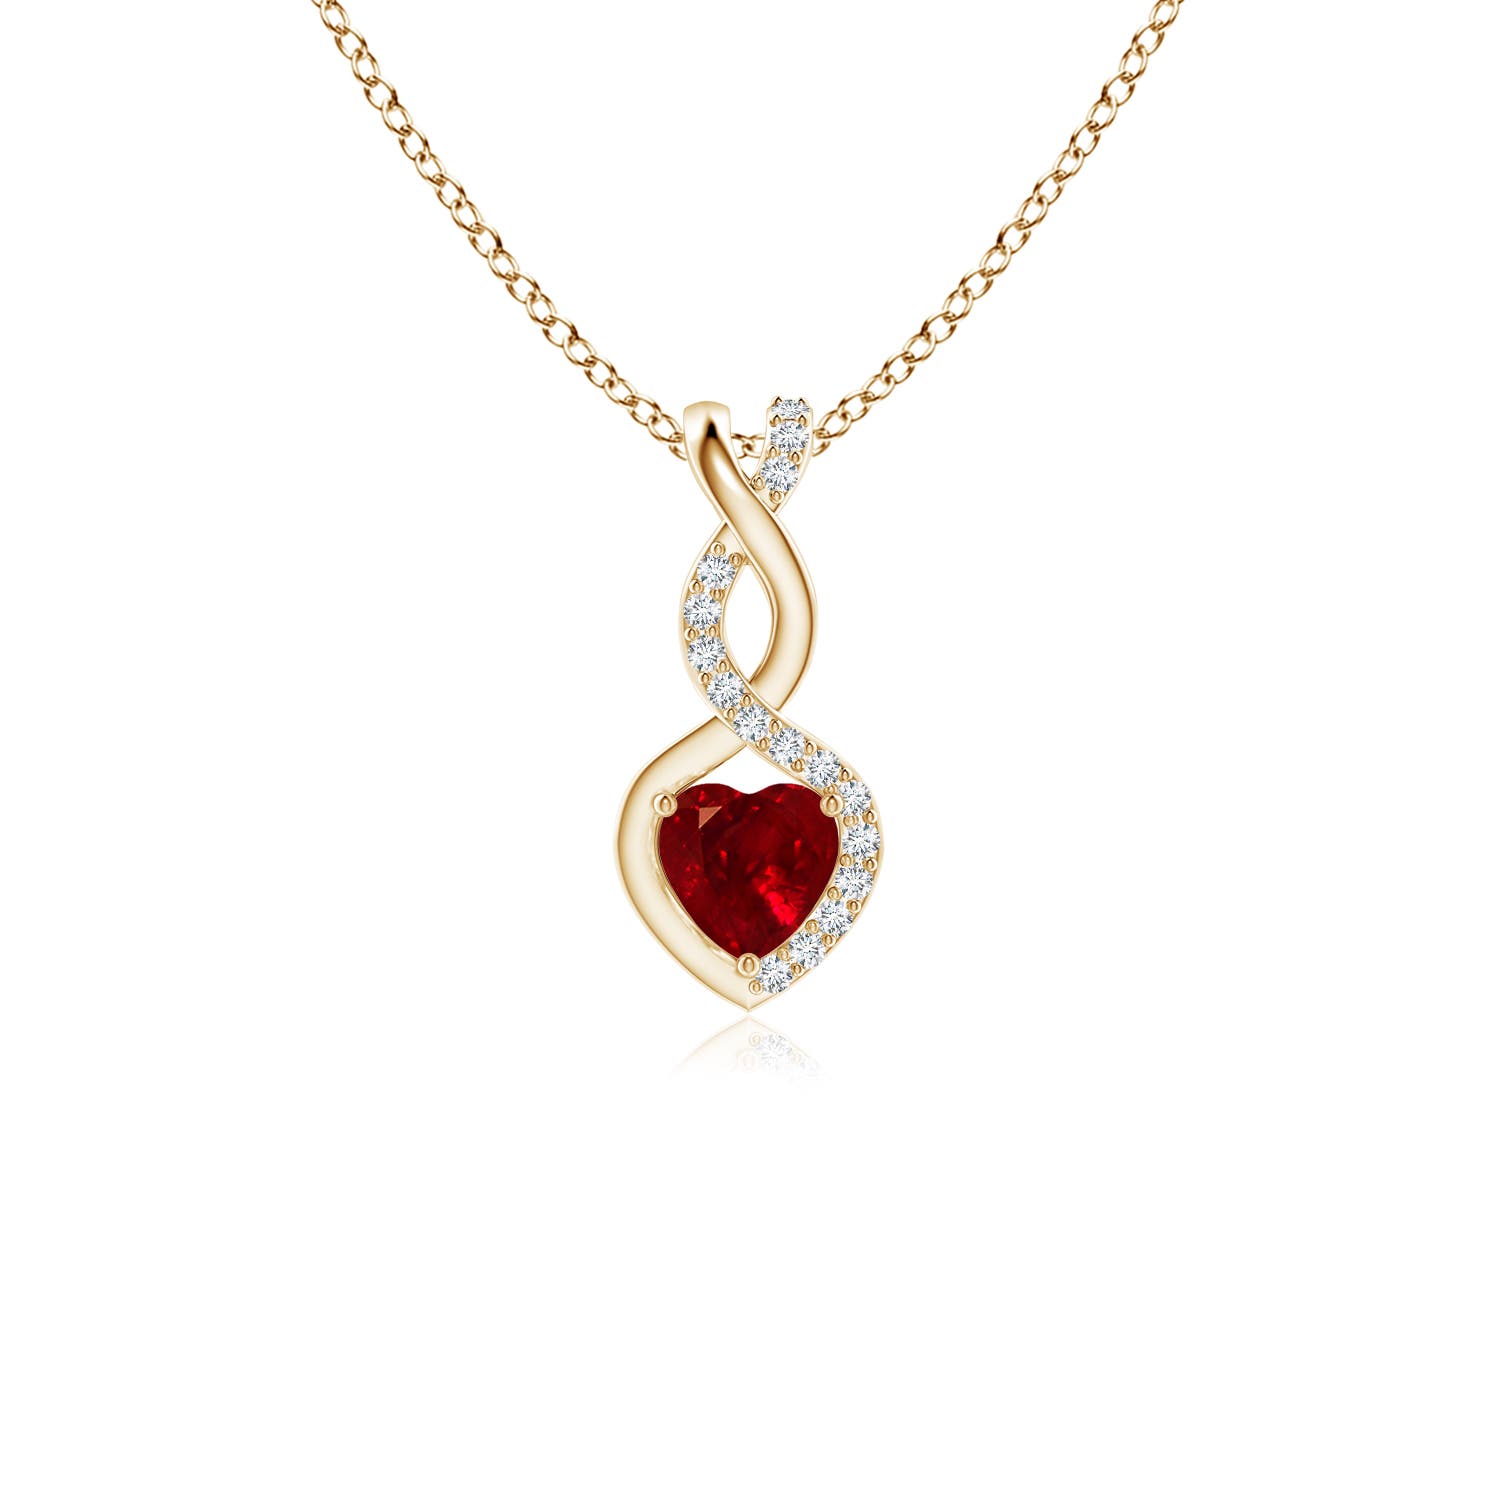 AAAA - Ruby / 0.35 CT / 14 KT Yellow Gold